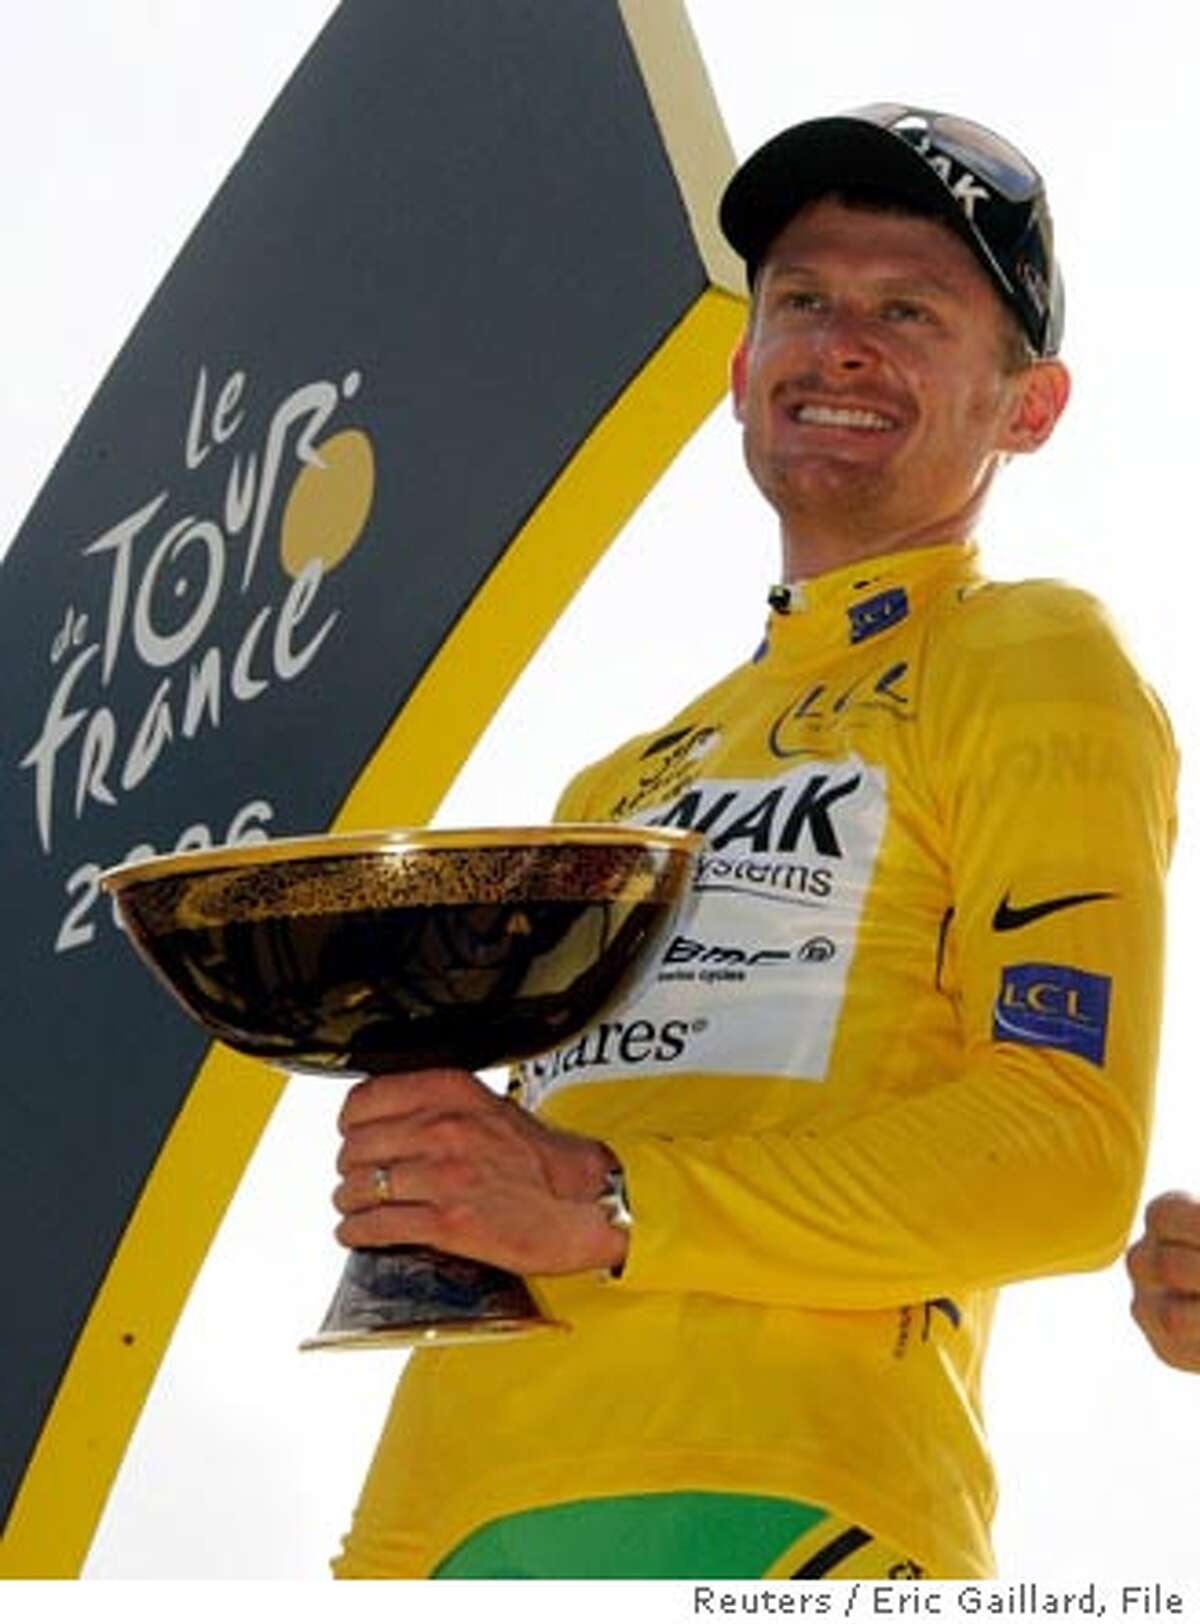 tour de france winners without doping